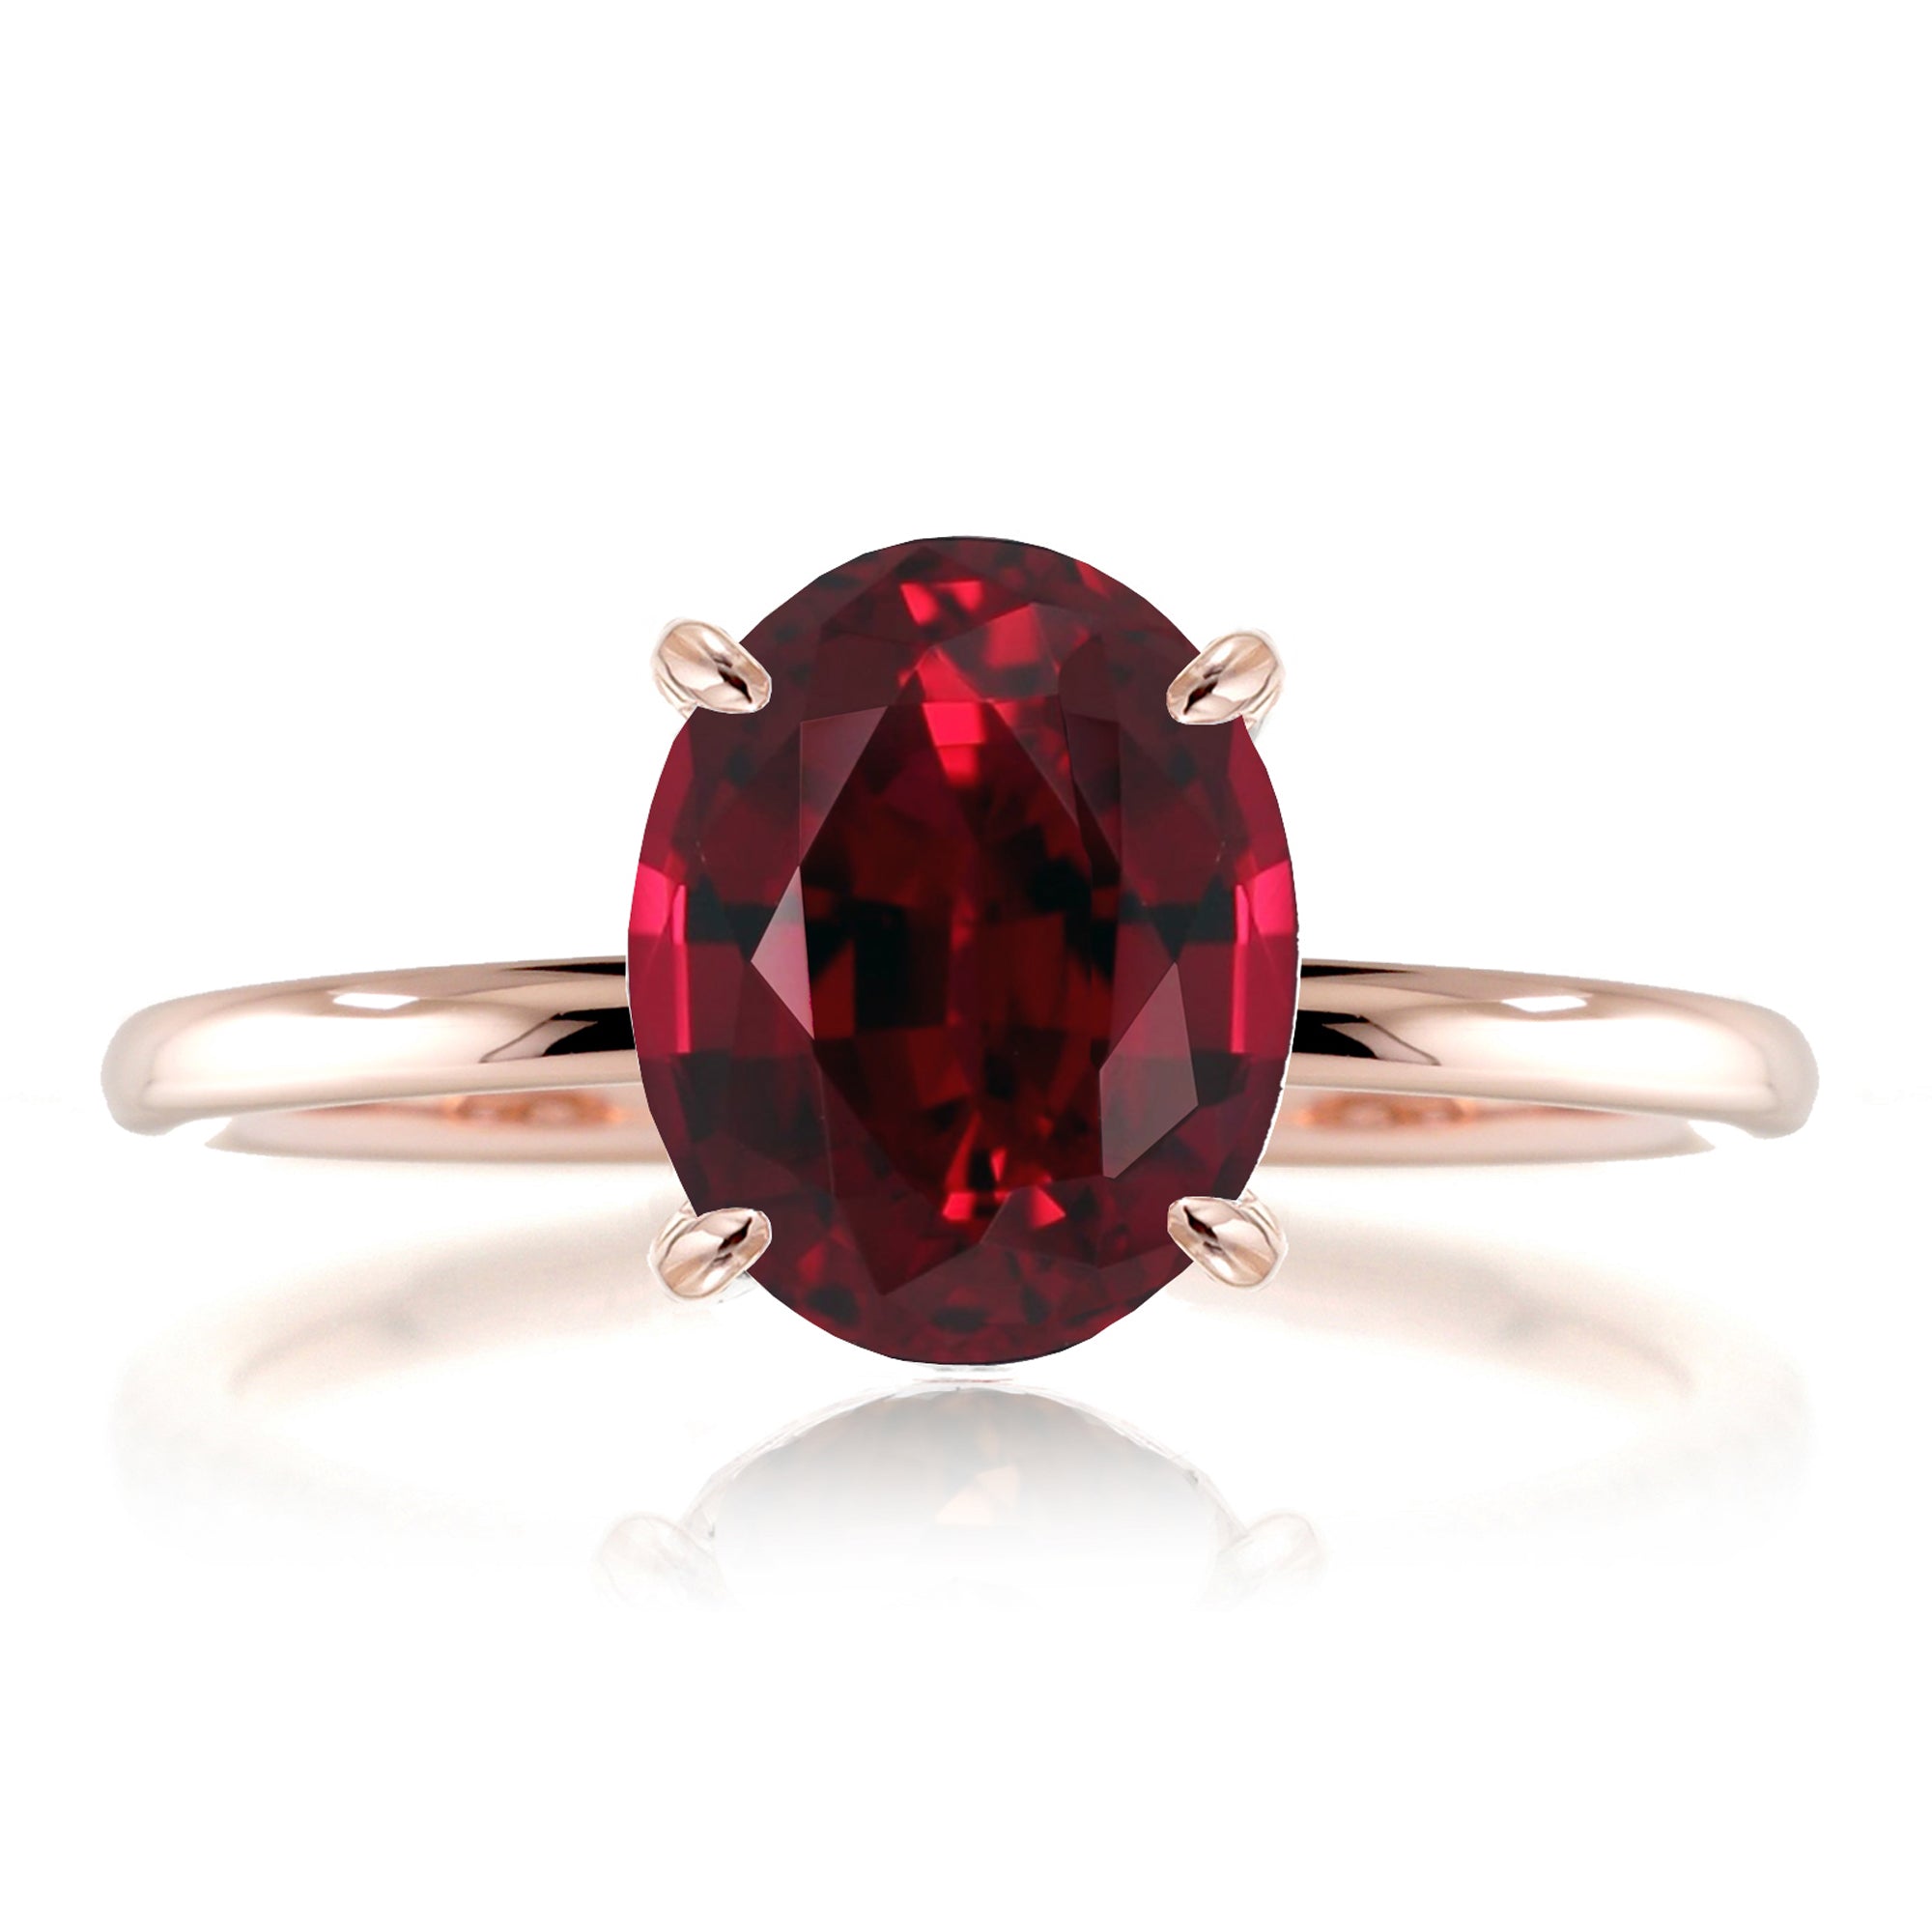 Oval lab-grown ruby solid band engagement ring rose gold - the Ava